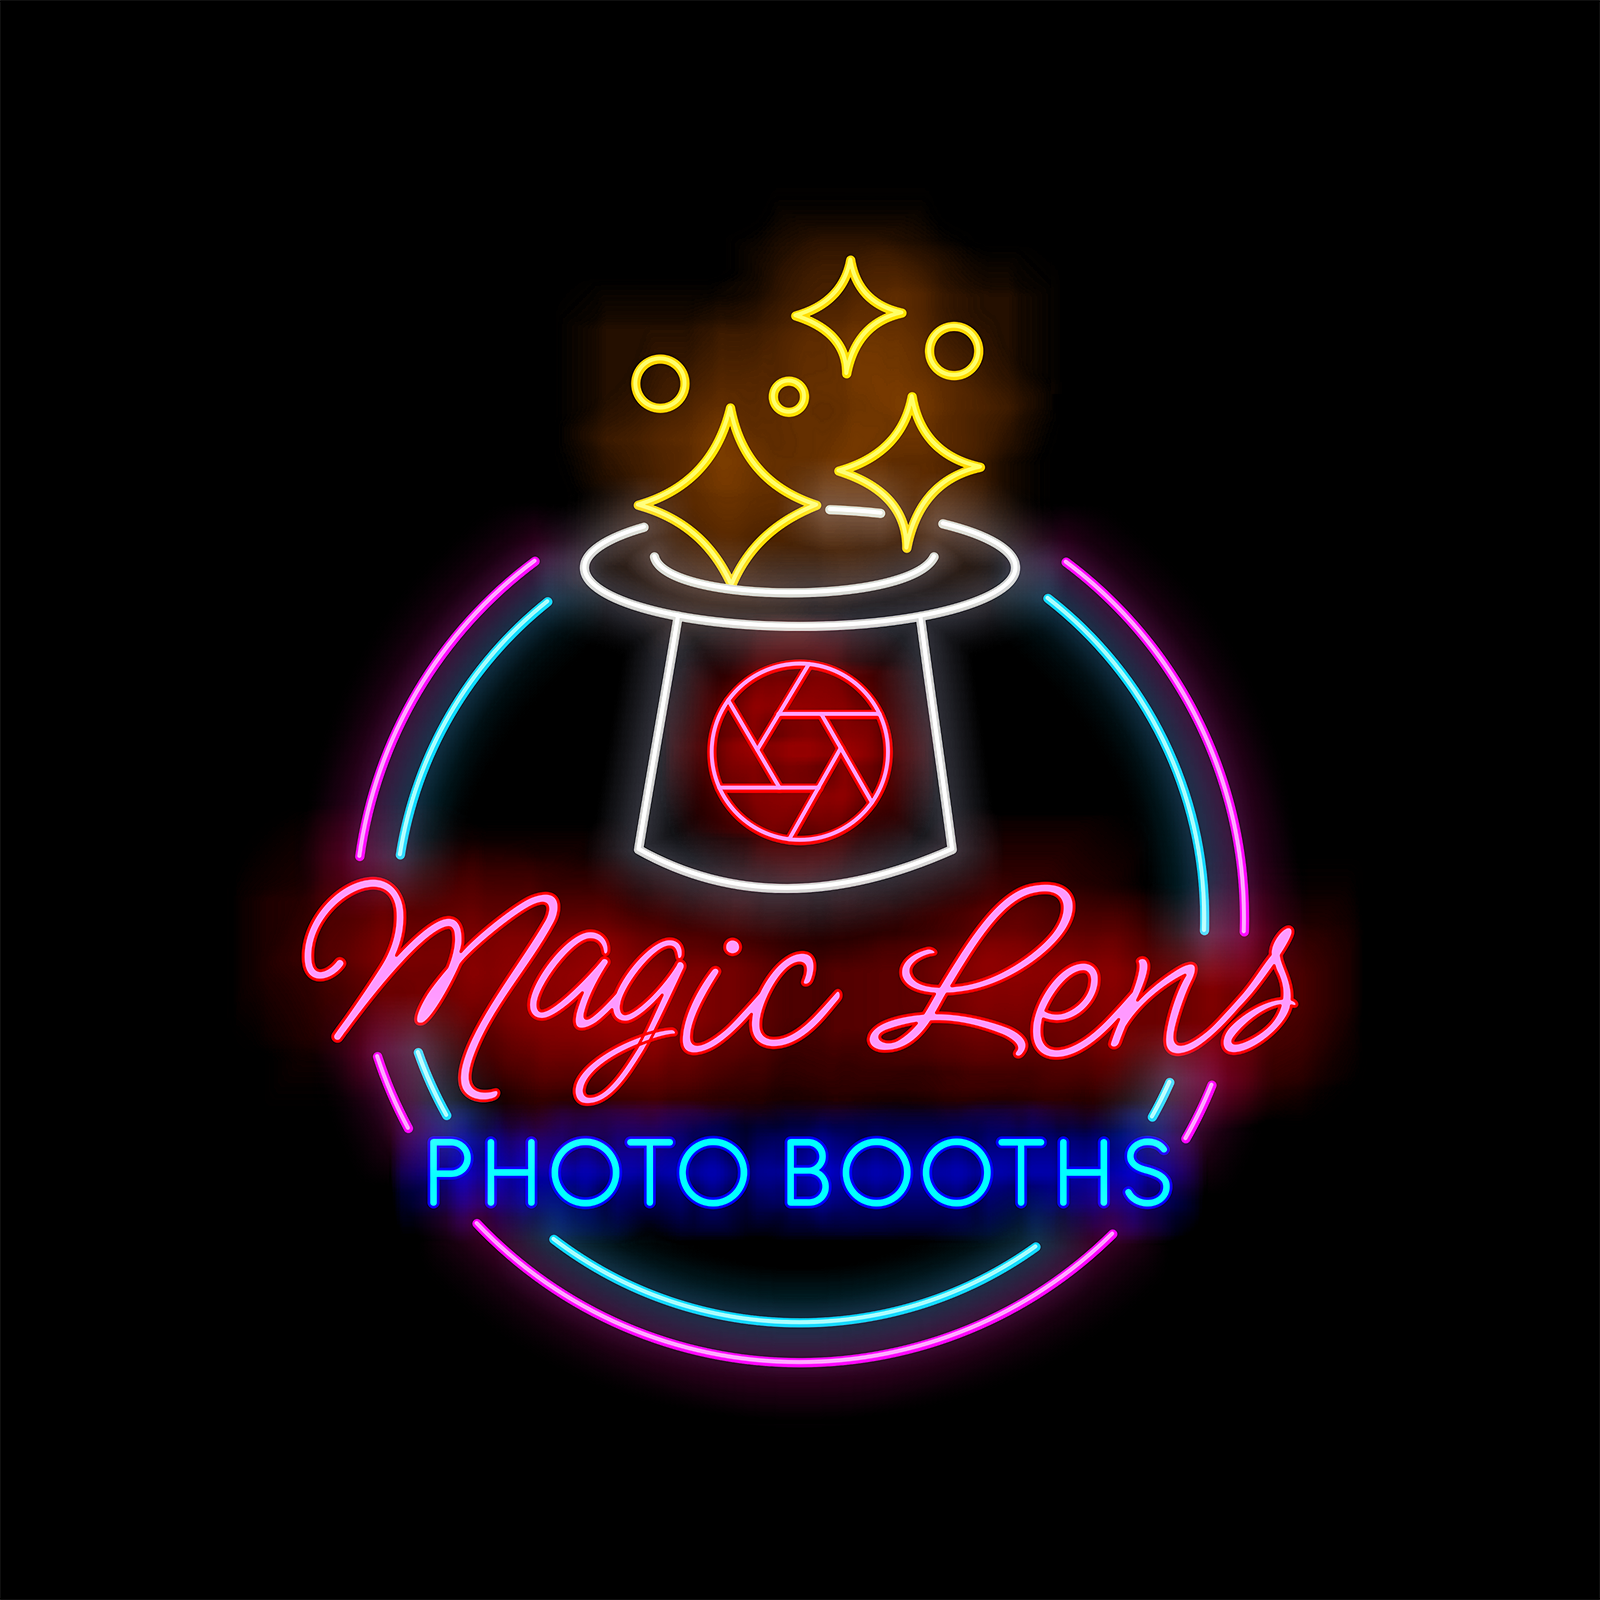 Magic Lens Photo Booths Sponsor for George Lopez Celebrity Golf Classic